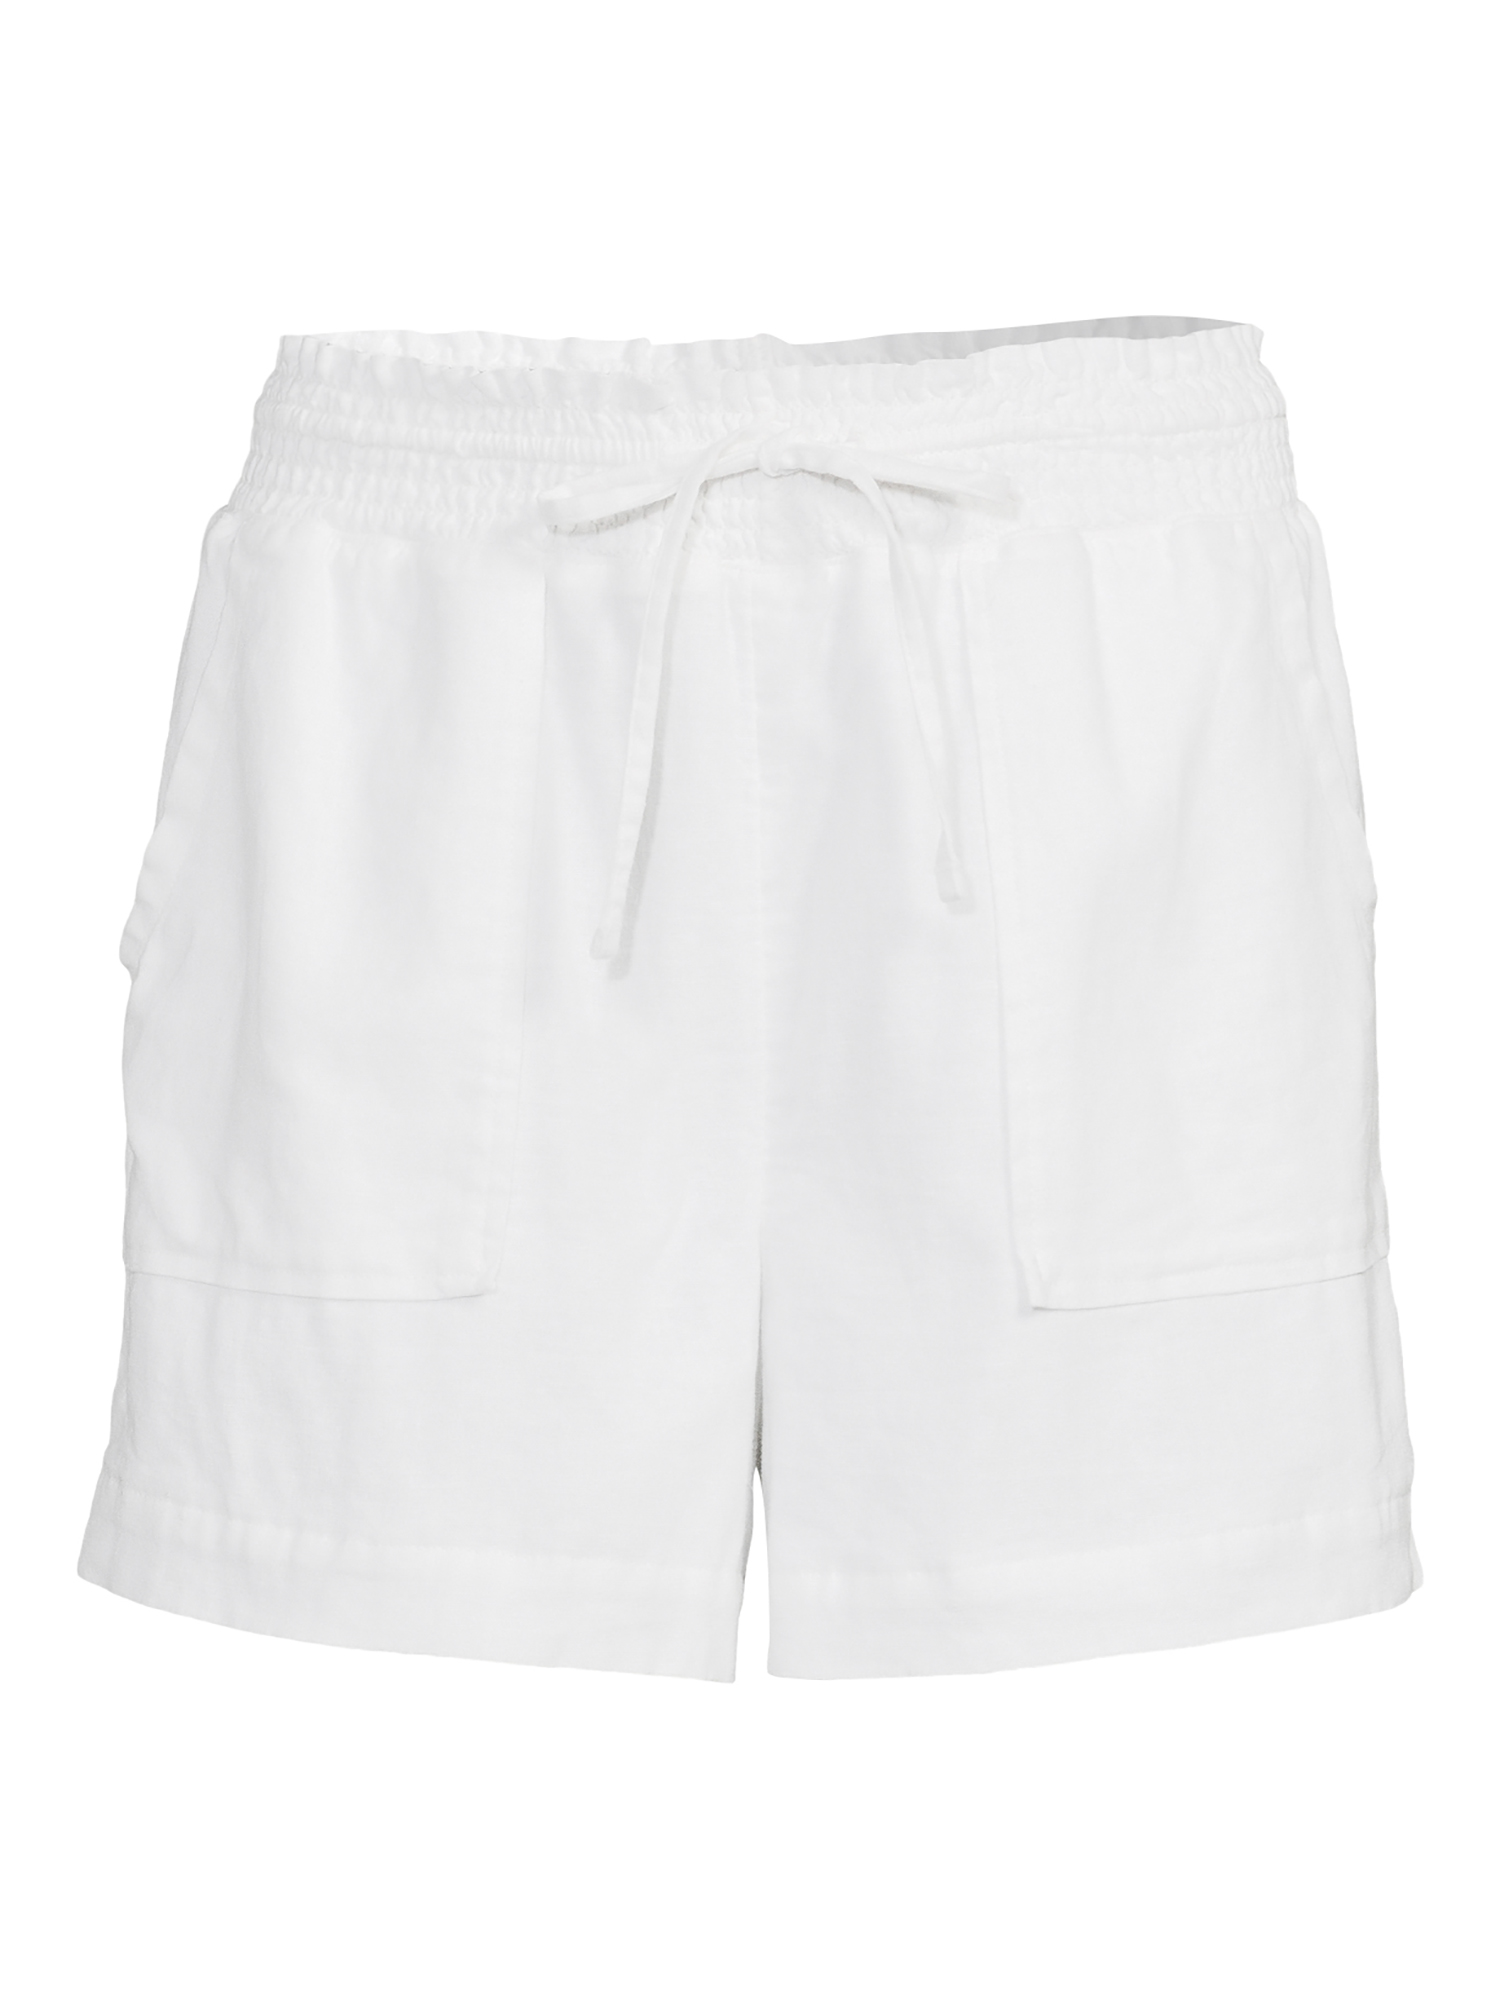 Time and Tru Women's Linen Shorts - image 5 of 5